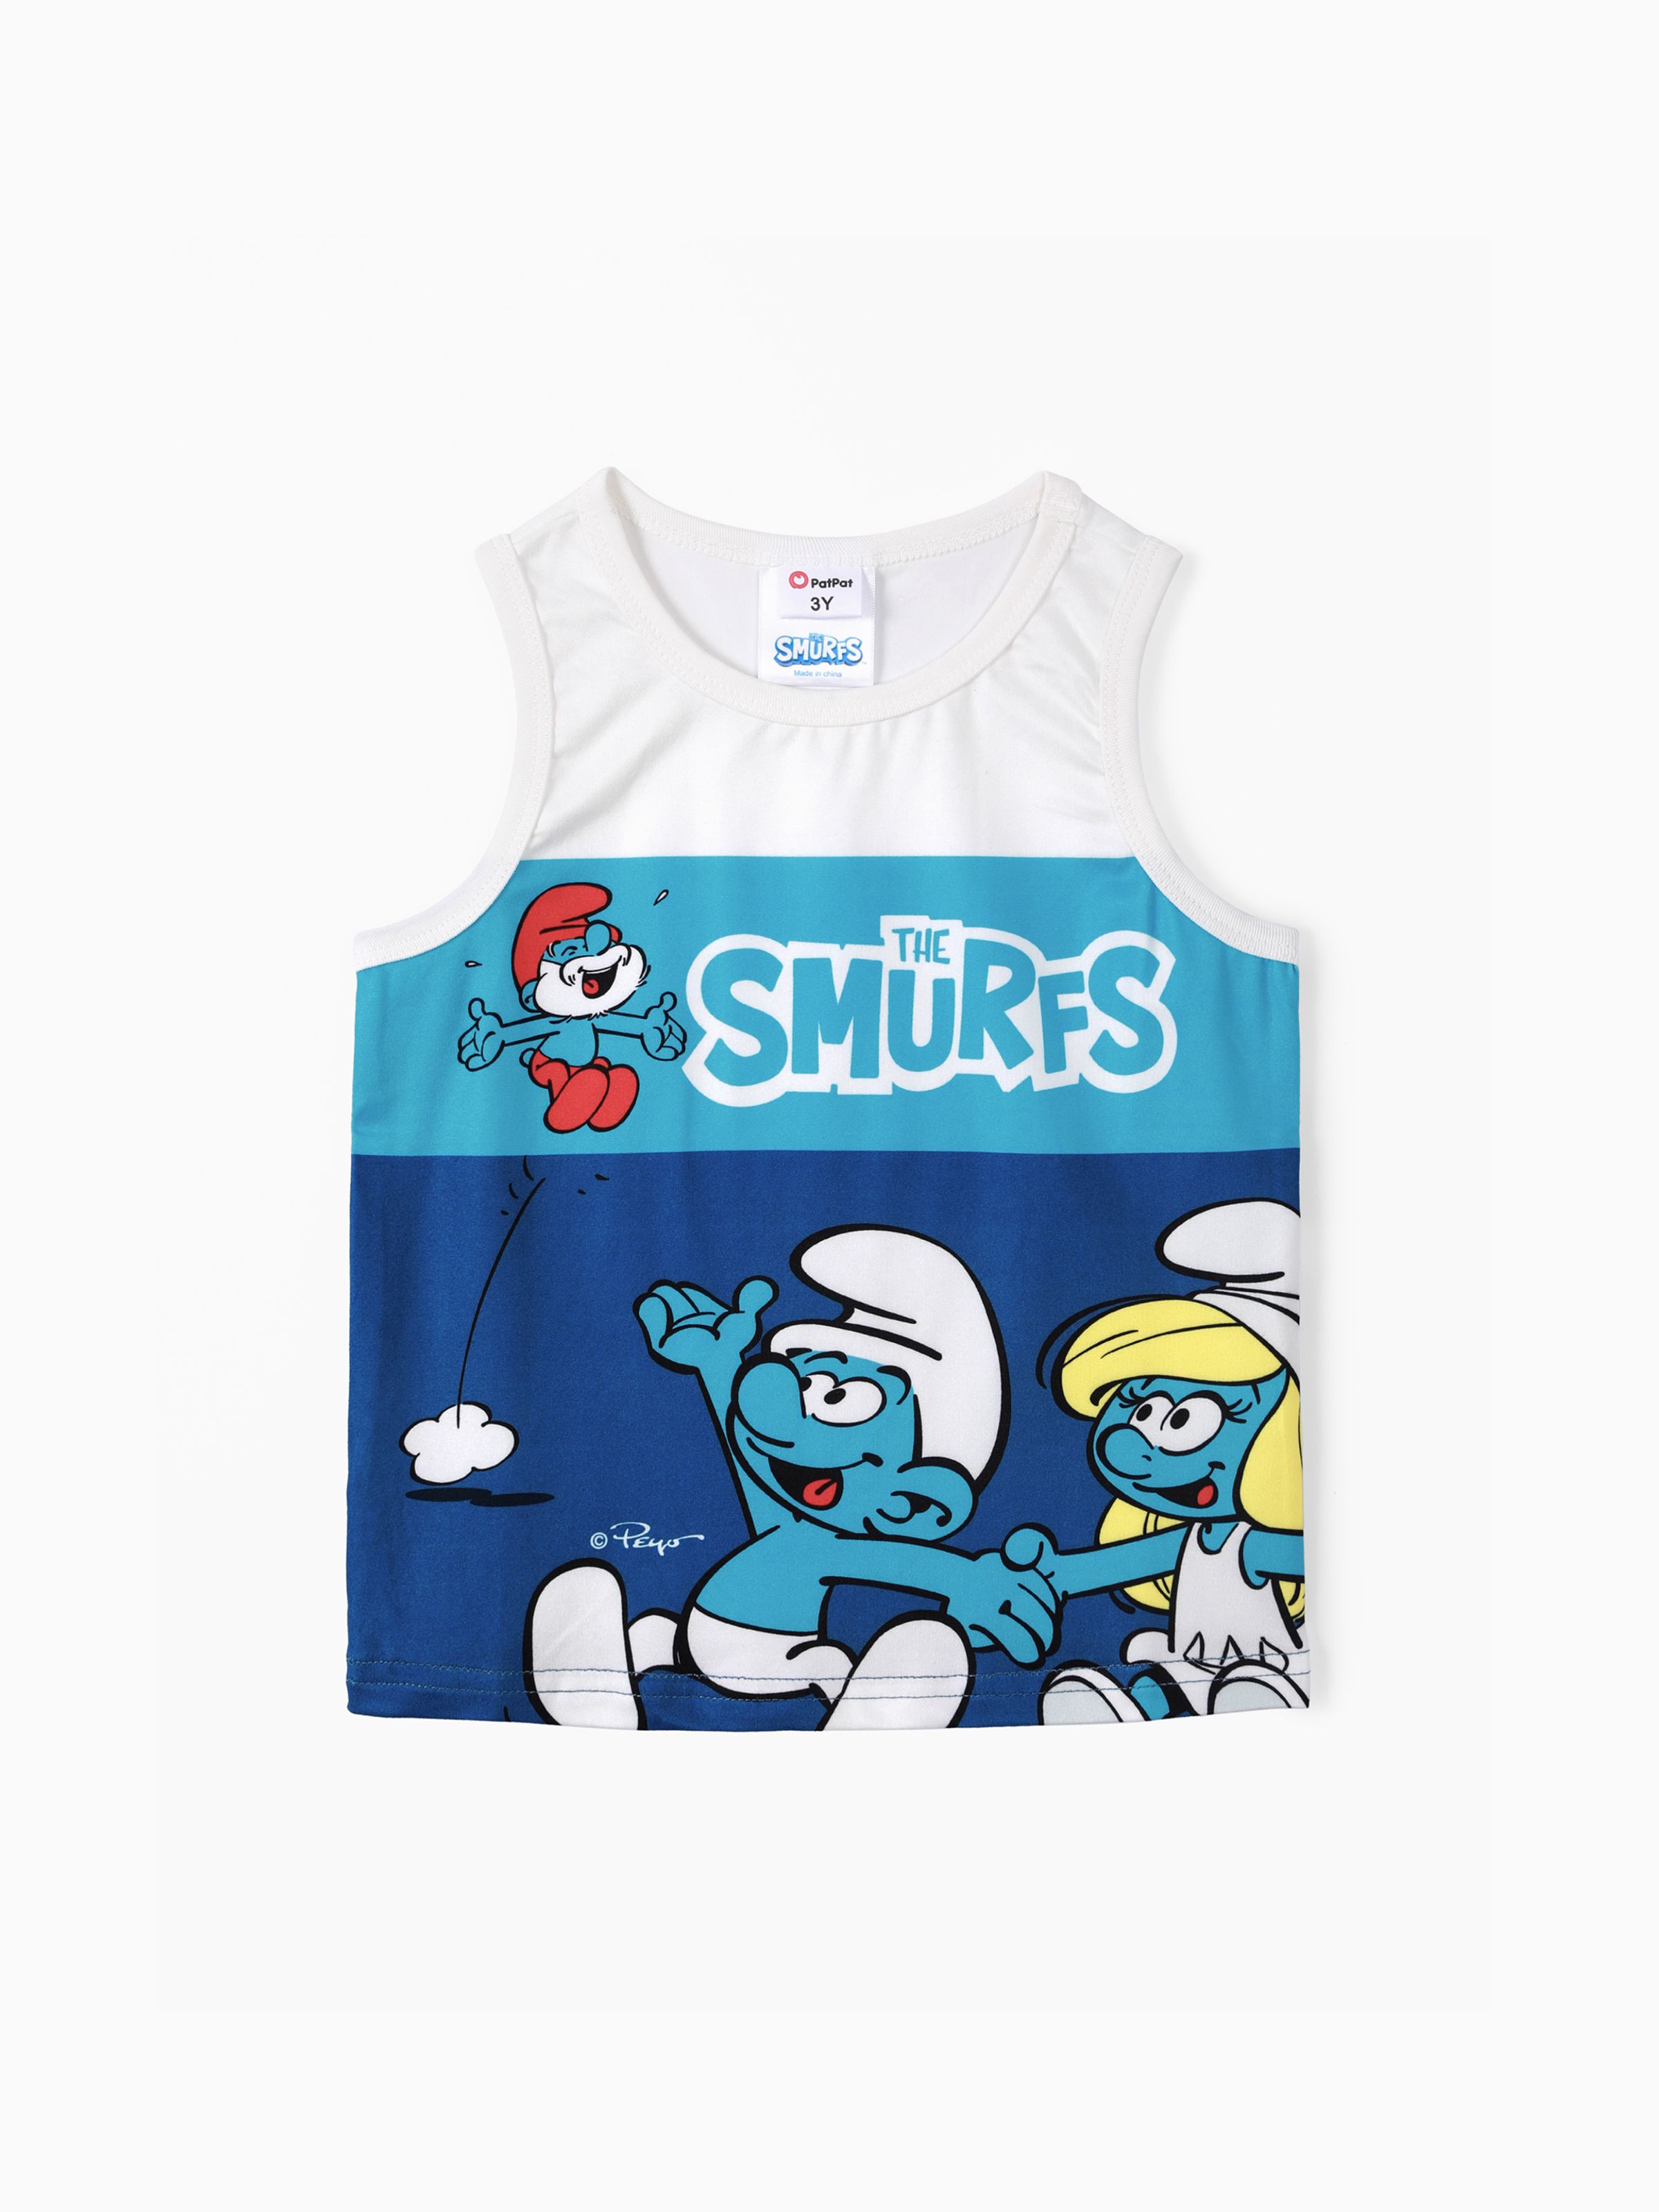 

The Smurfs Toddler Boys 1pc Character Print Tank Top